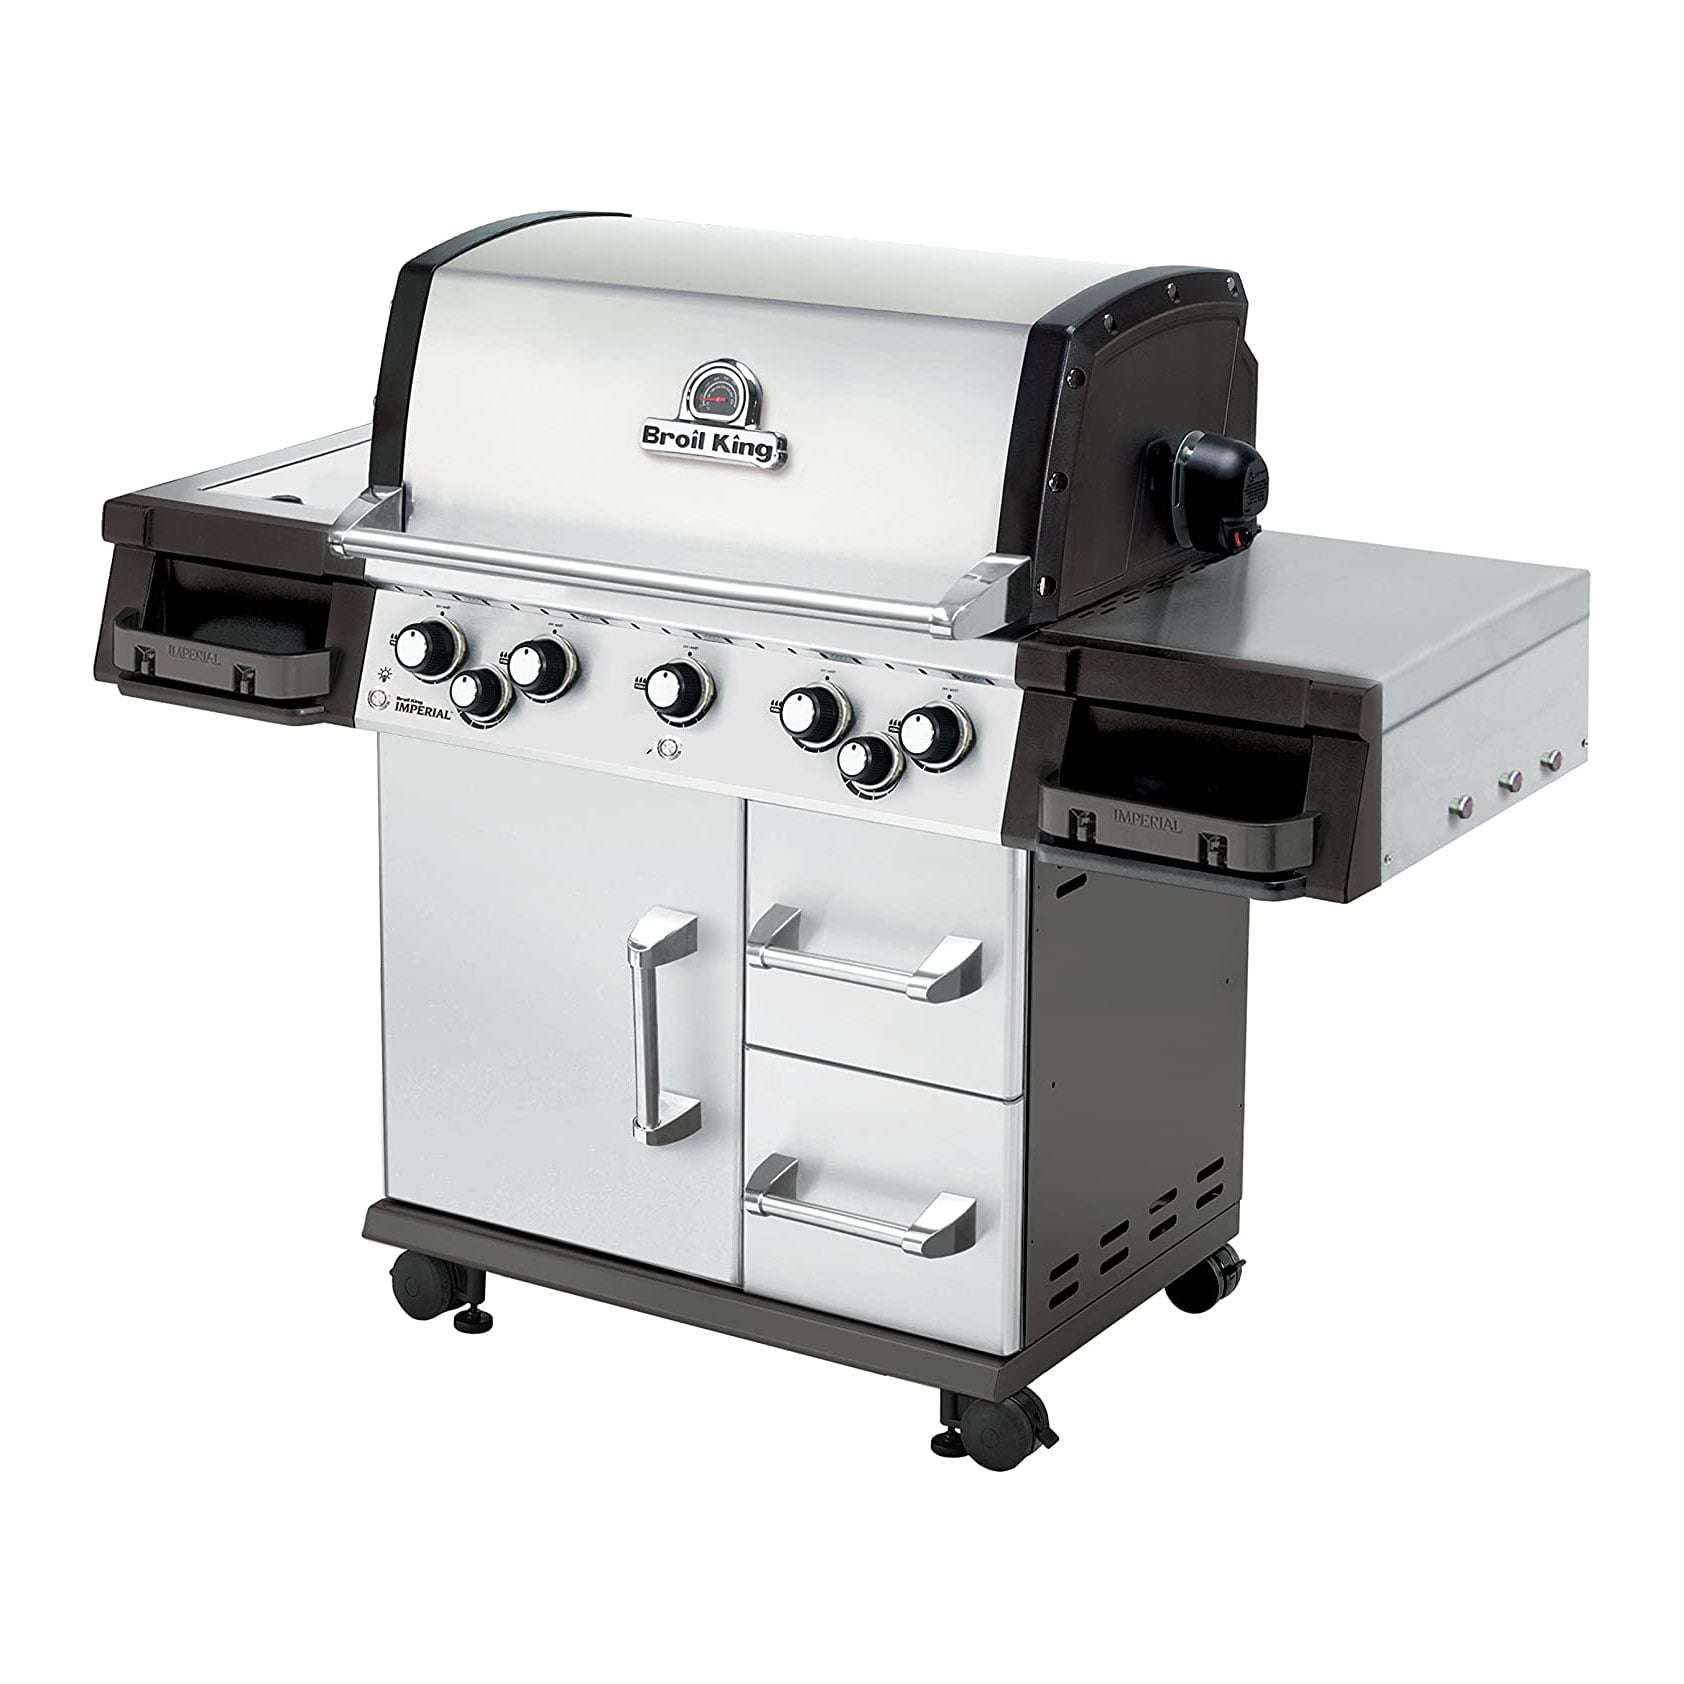 Broil King 5 Burner Imperial 590 Liquid Propane Powered Grill ...